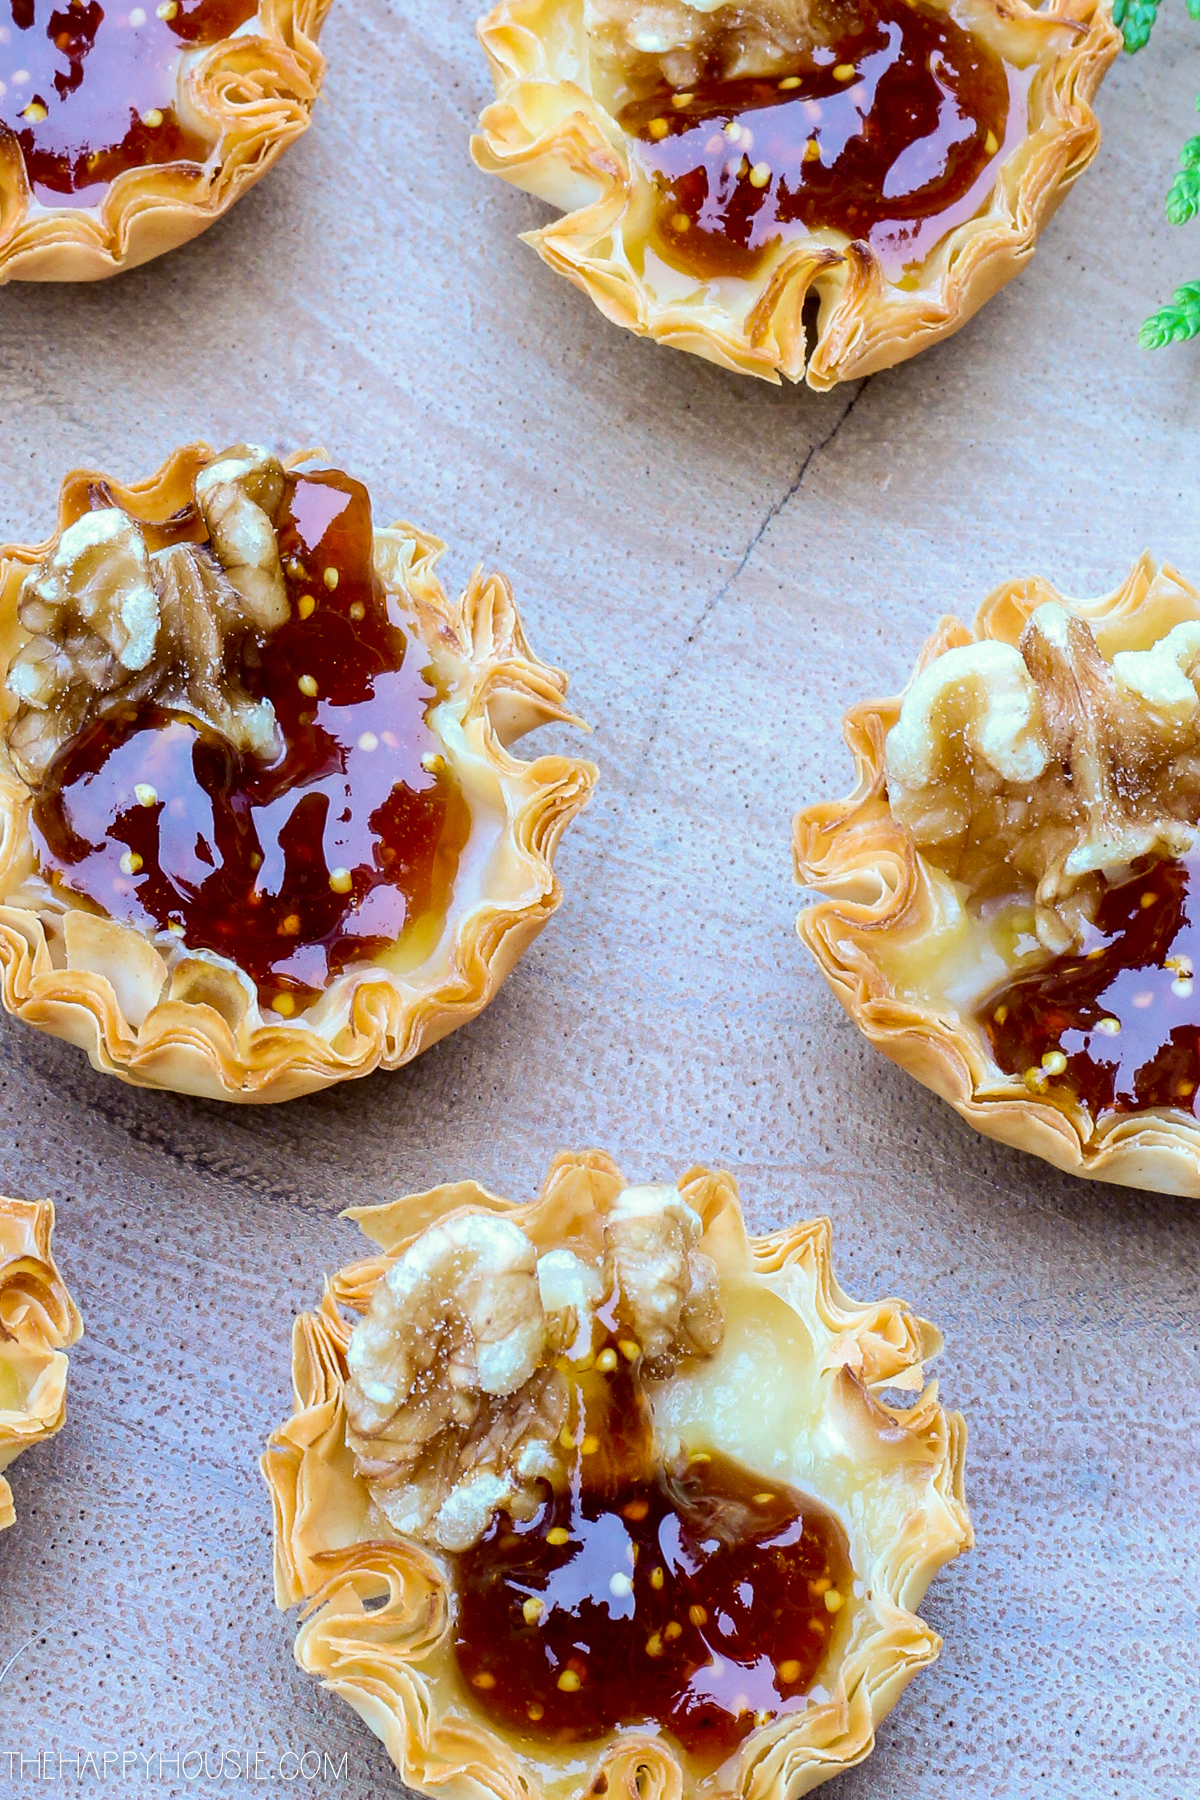 Baked Brie Bites with Fig Jam & Crispy Prosciutto Phyllo Cups